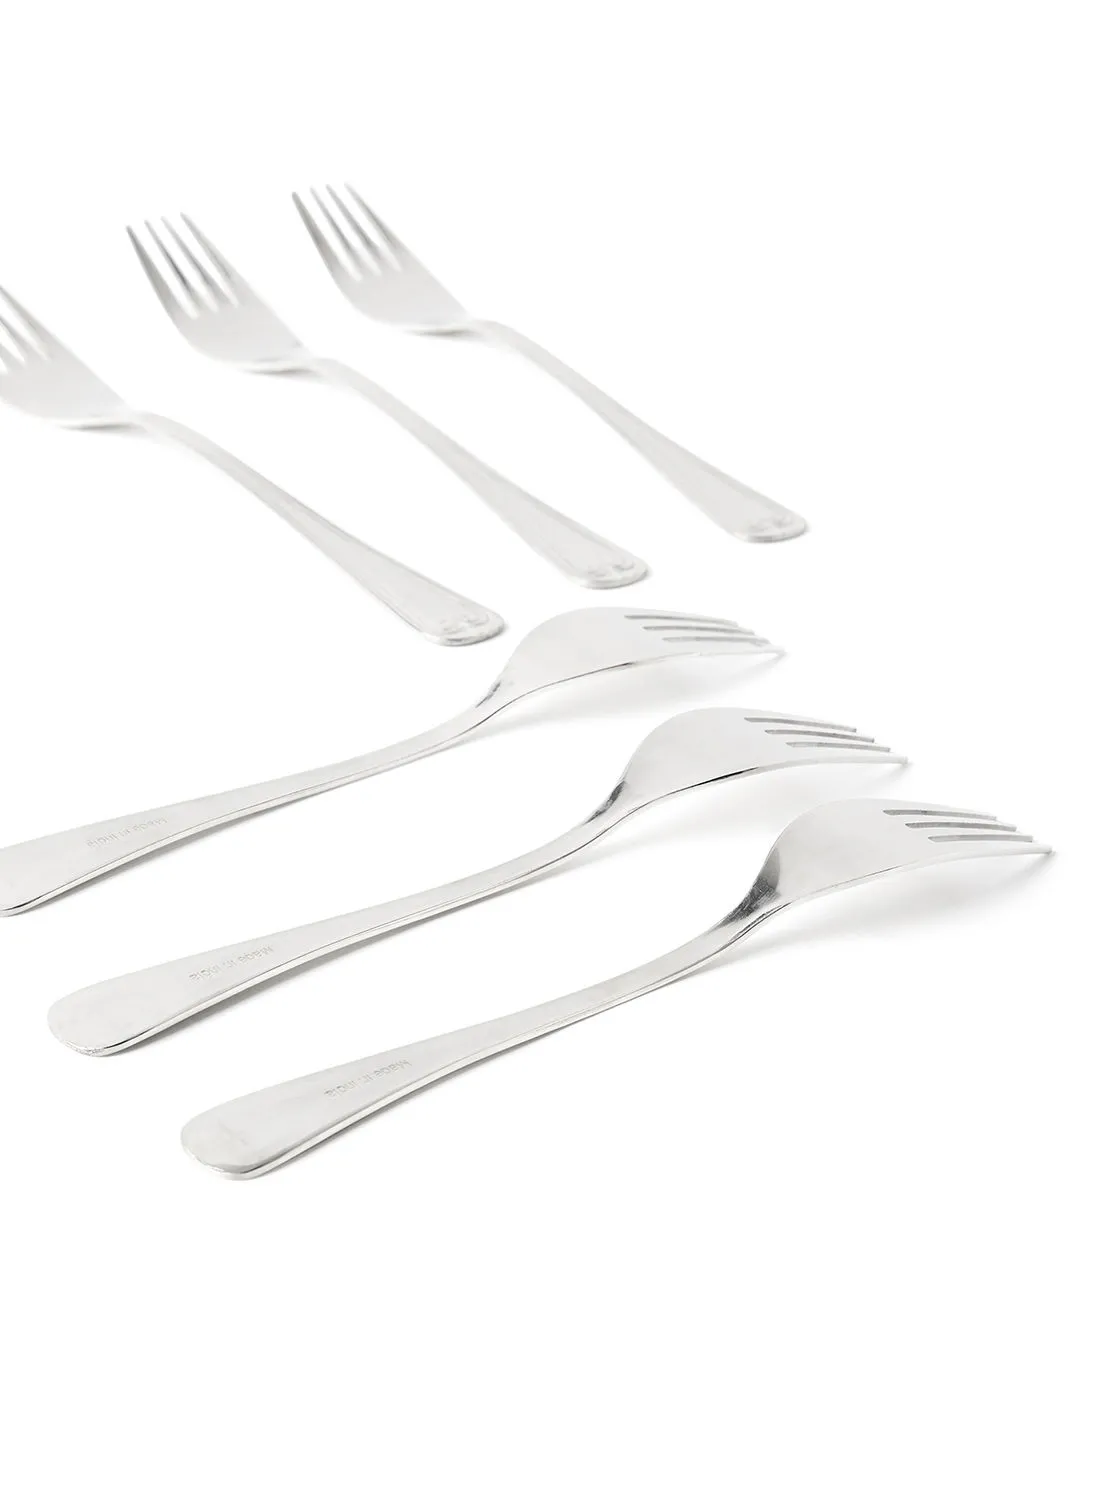 noon east 6 Piece Forks Set - Made Of Stainless Steel - Silverware Flatware - Fork Set - Serves 6 - Design Silver Classic